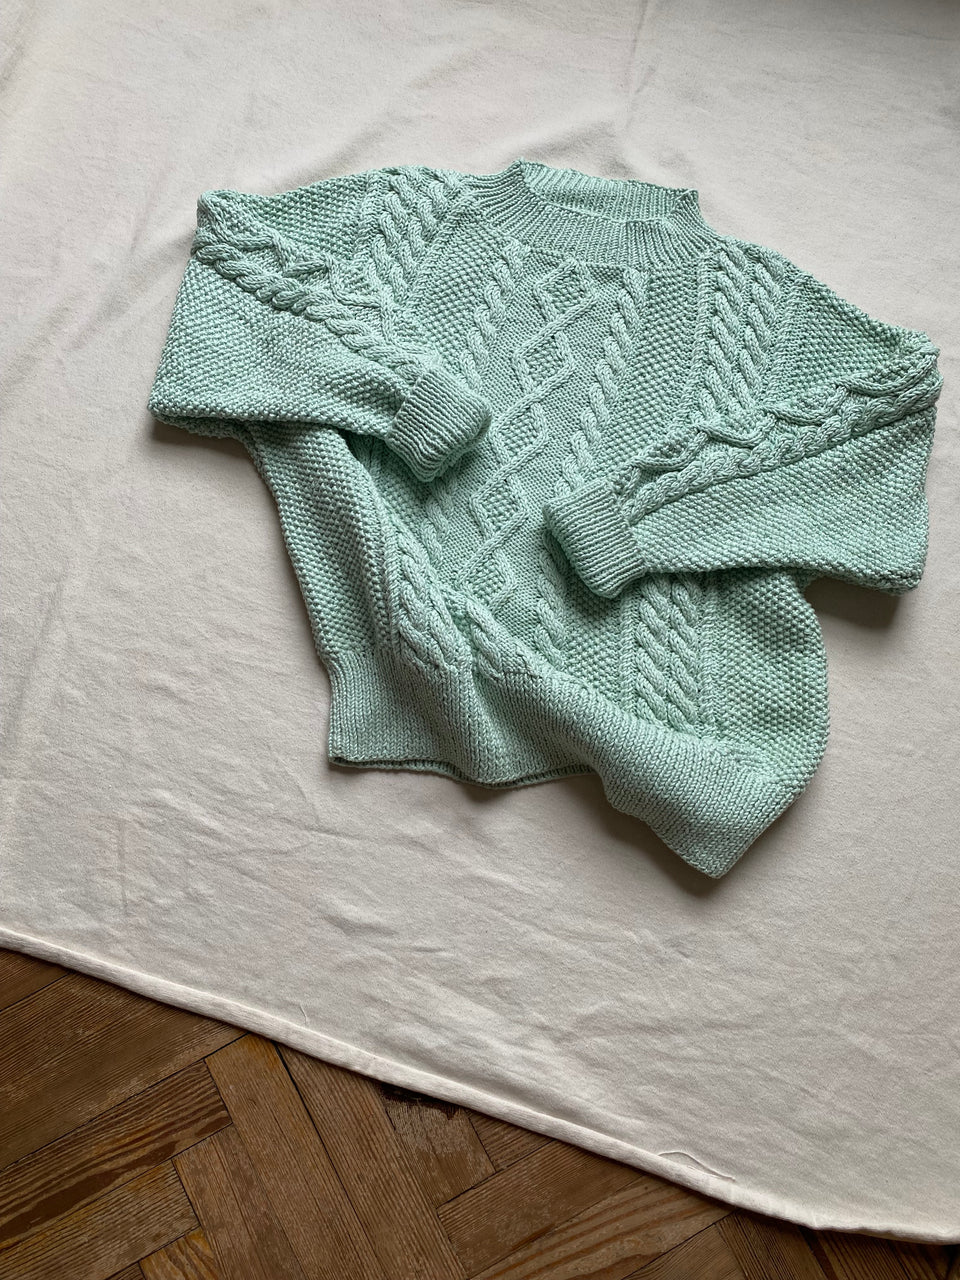 SWEETGRASS jumper / indian cotton / mint ice / sample / 2 sizes available